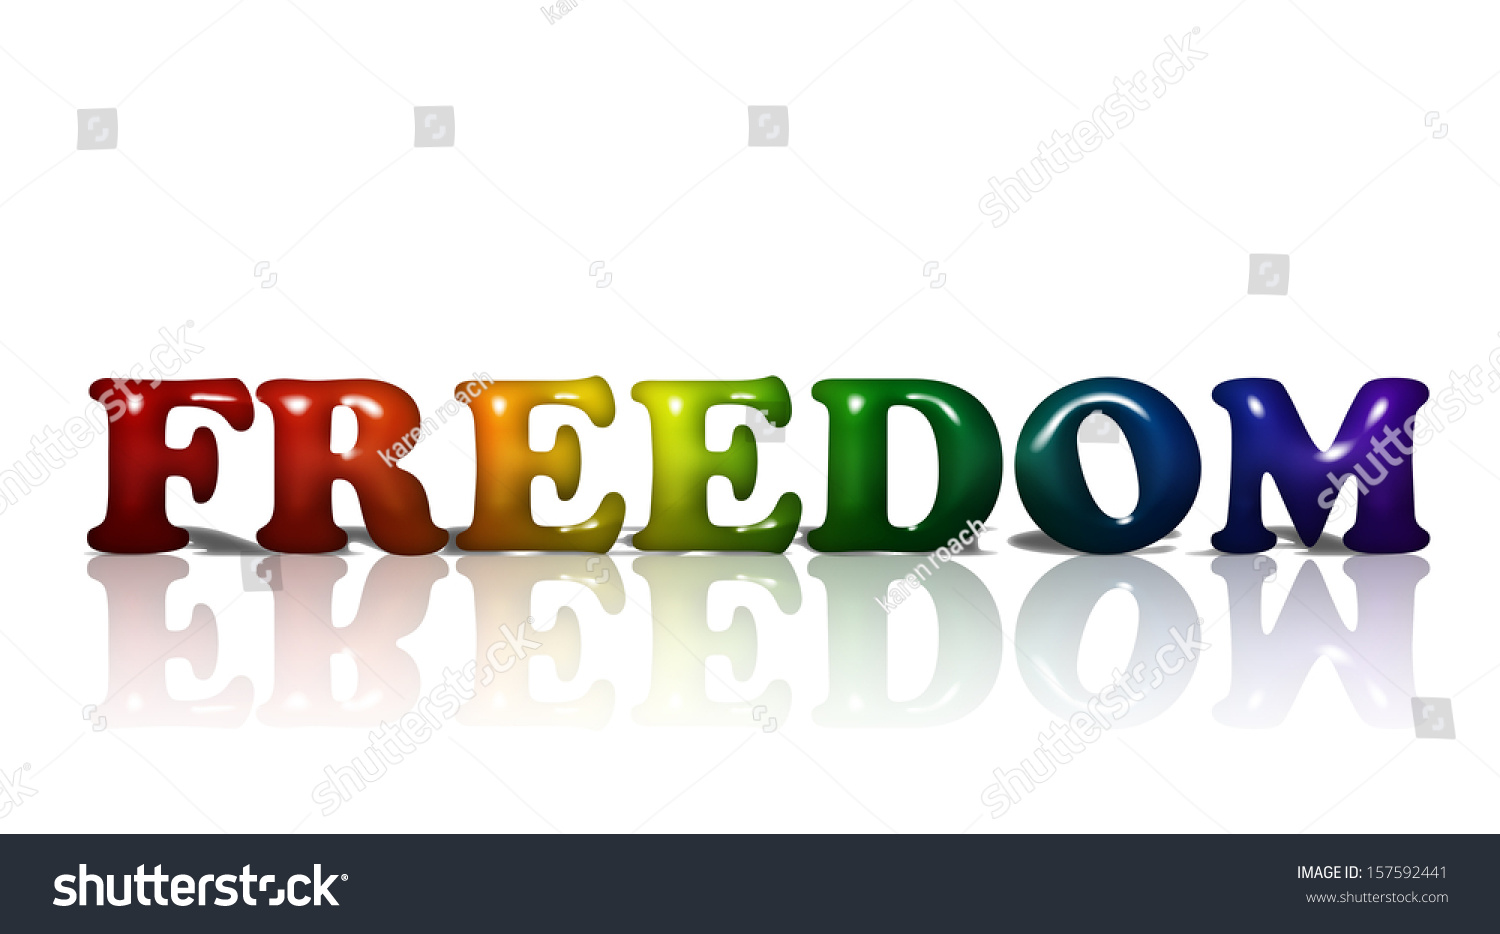 Image result for pictures of the word freedom